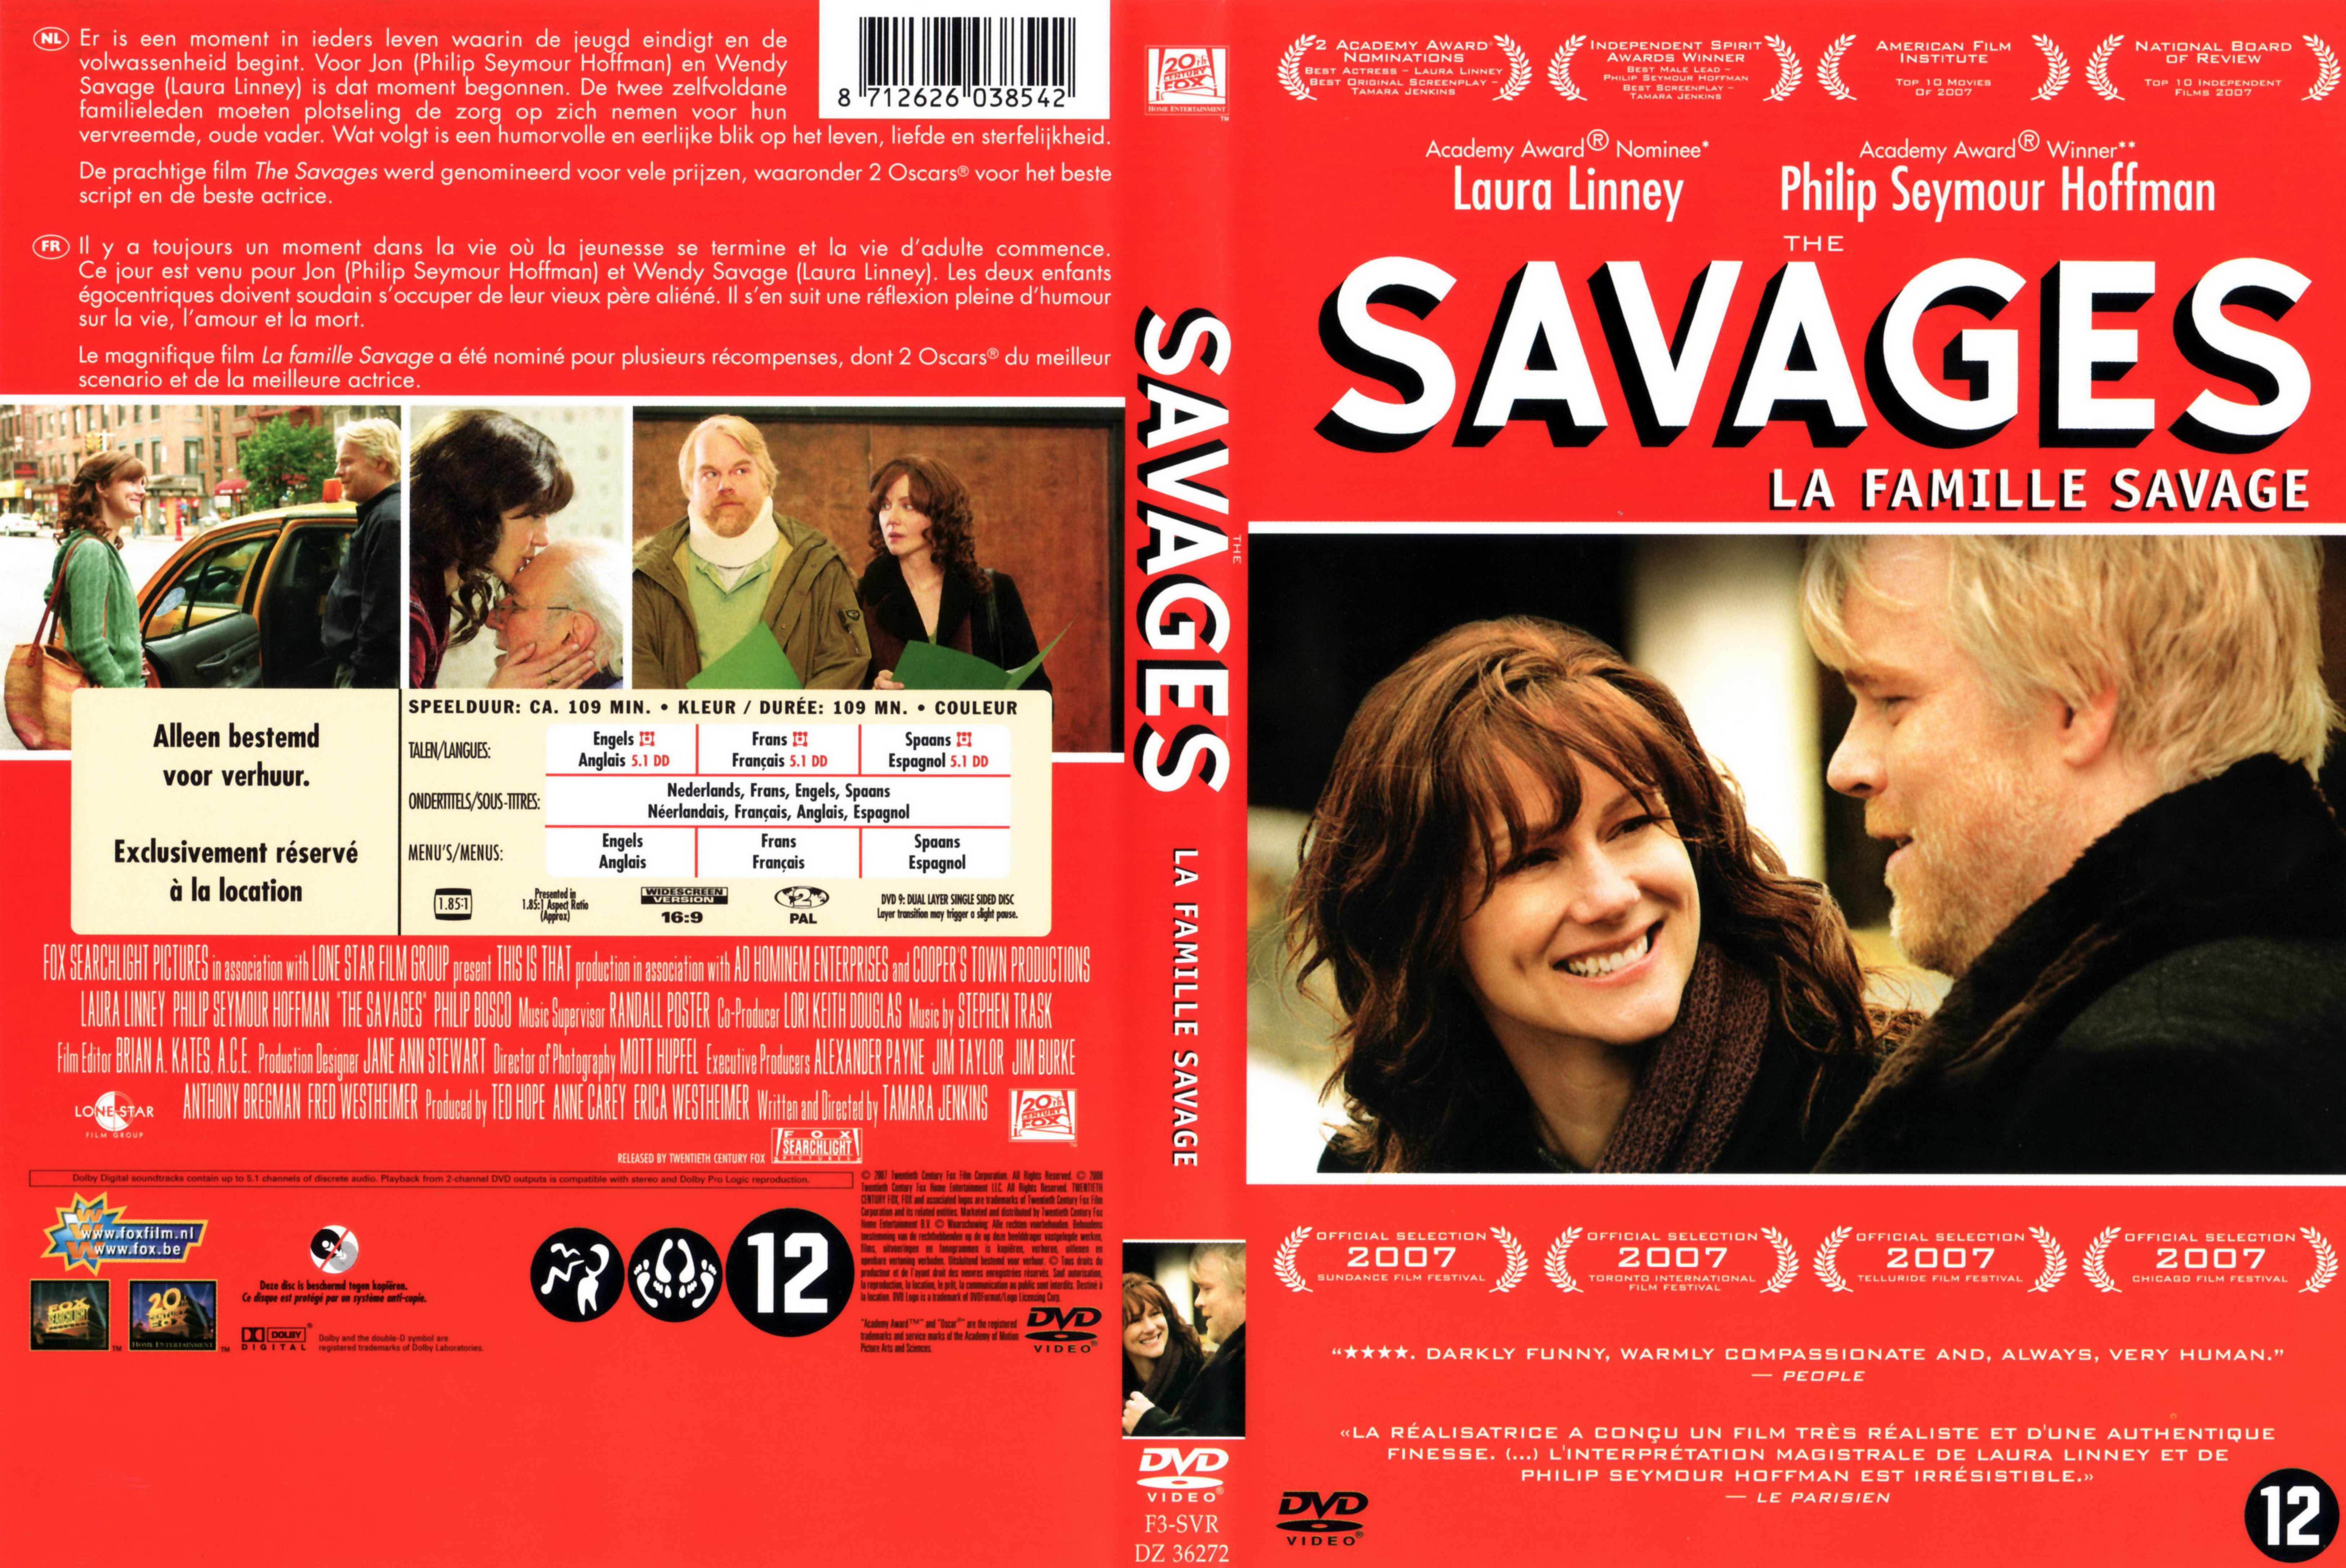 Jaquette DVD The Savages - La famille Savage